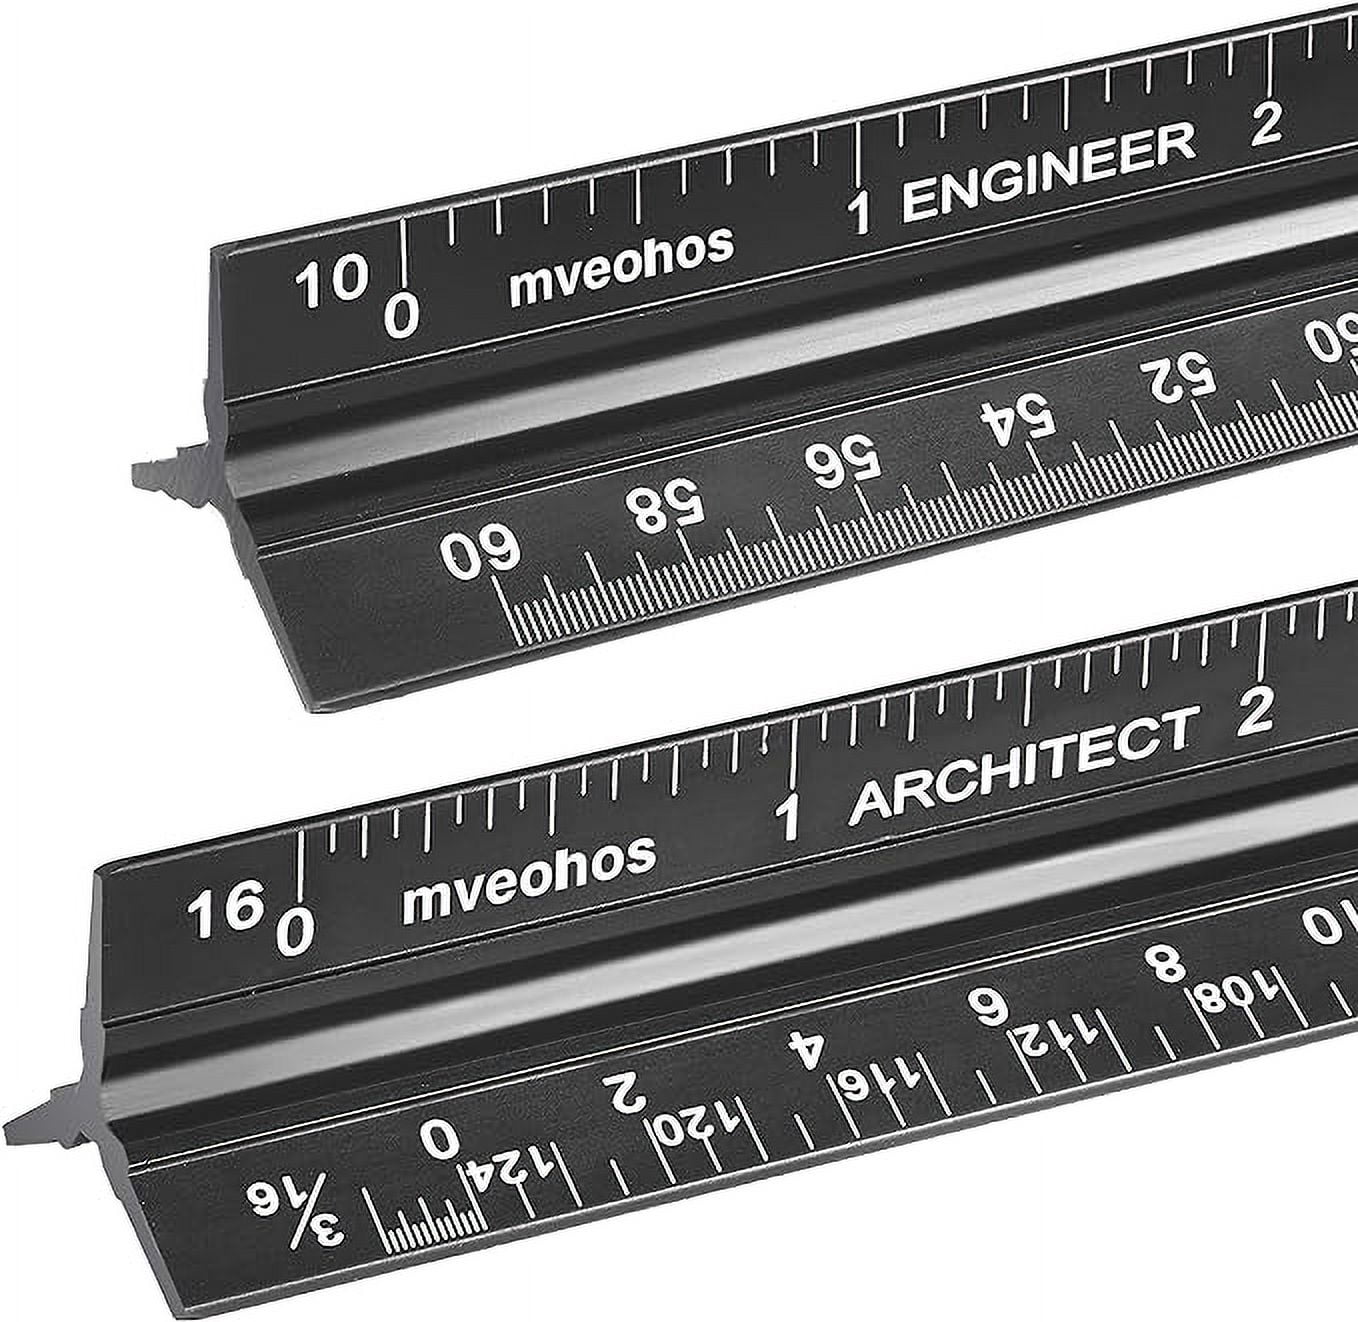 Dagongren Architectural Scale Ruler for Blueprint 12\ Metric Metal Engineers Triangle Drafting Ruler with Imperial Measurements for Architects Engine